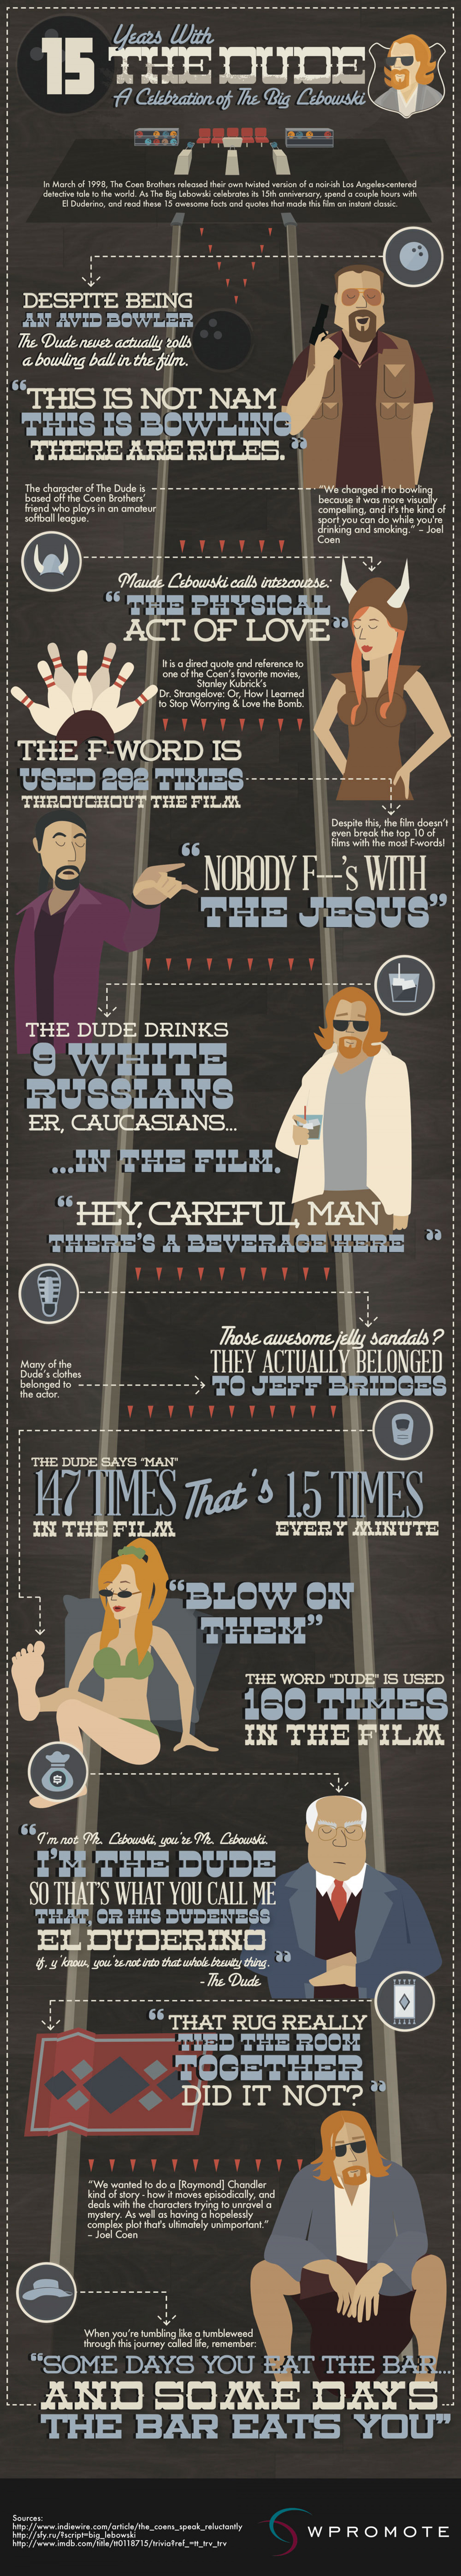 15 Year Anniversary of The Big Lebowski Infographic